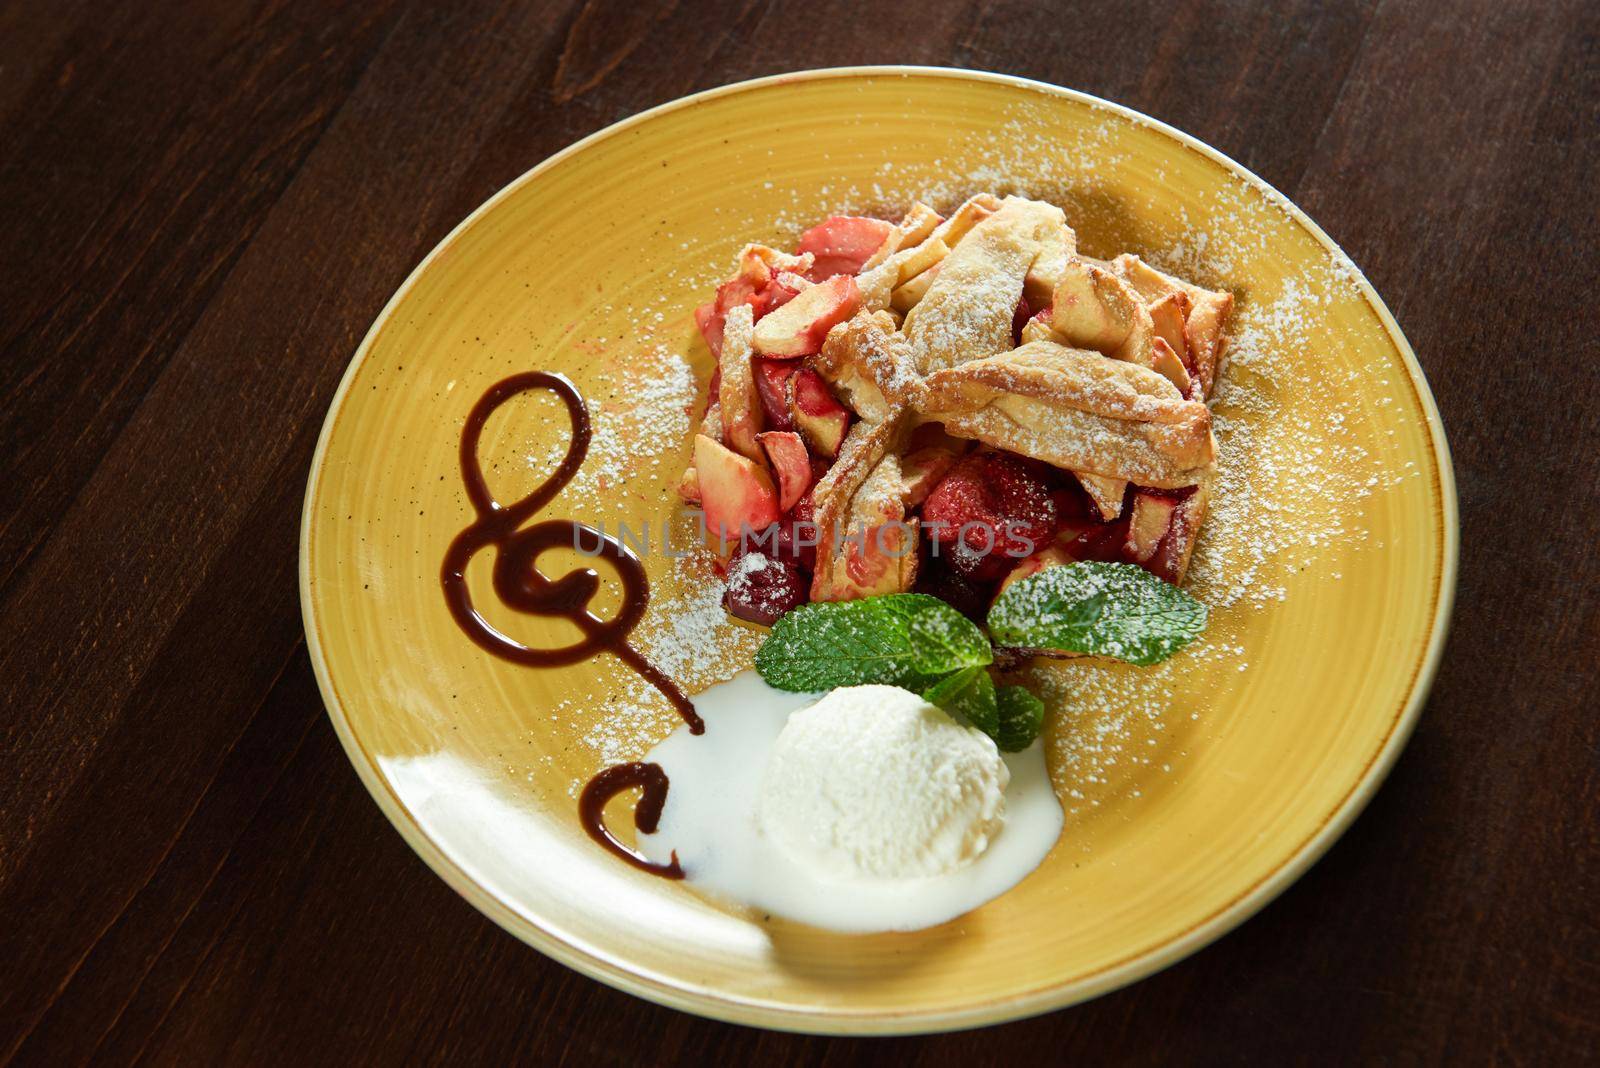 Rich taste. Piece of mouthwatering fruit strudel decorated with mint and served with a scoop of ice cream